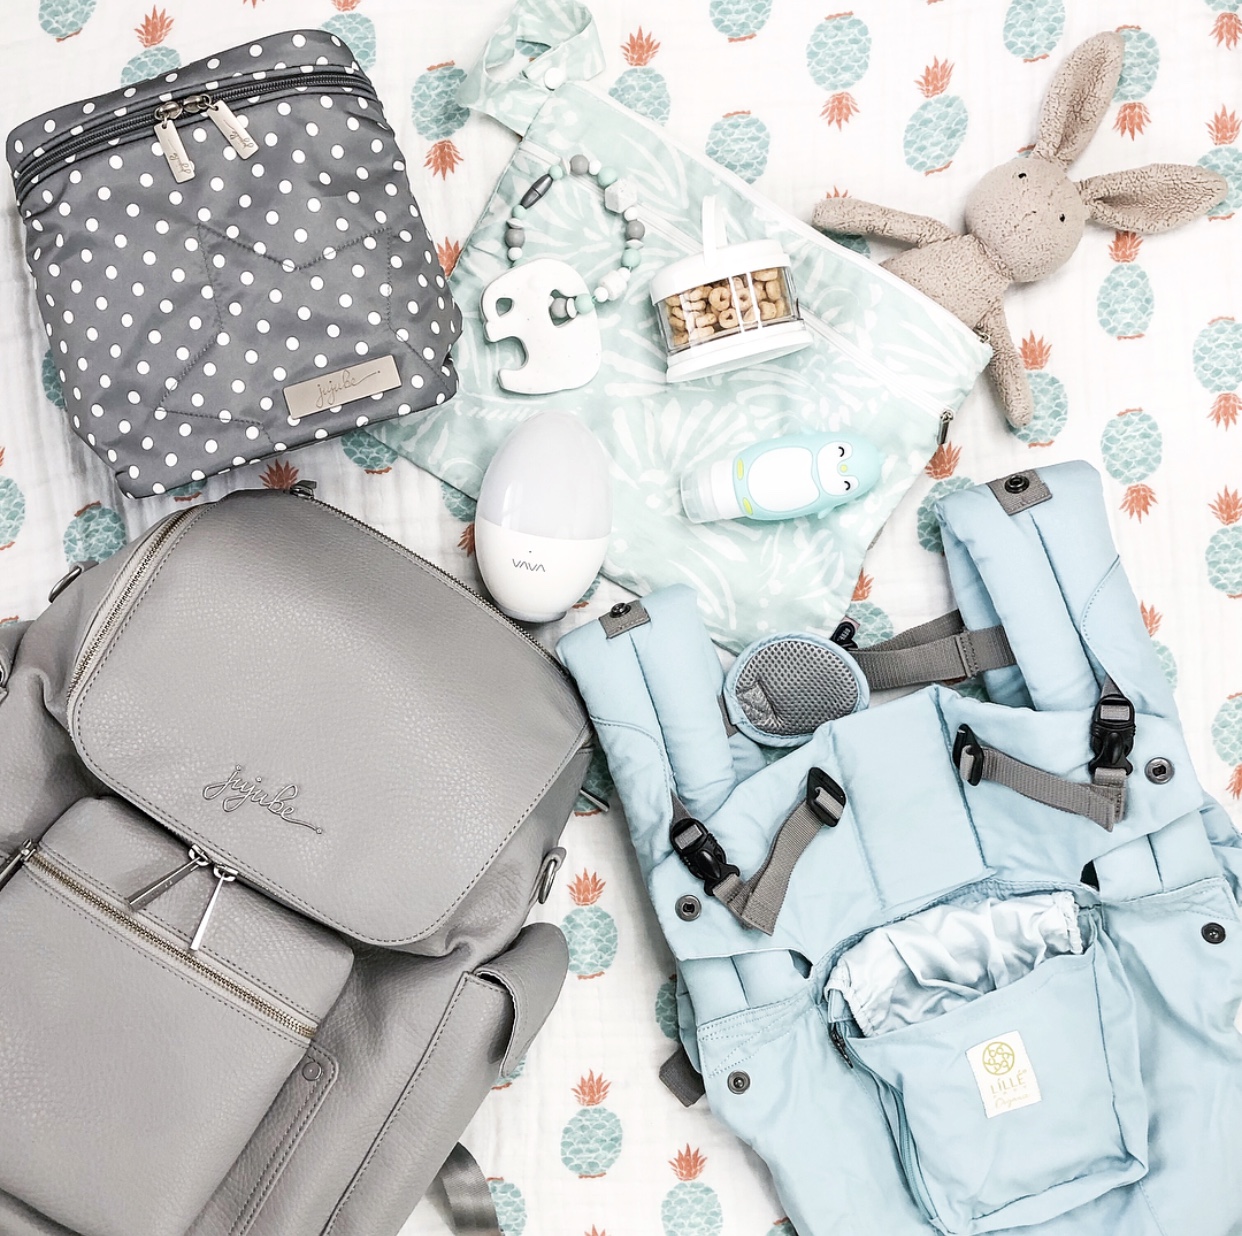 ju-ju-be, jujube forever backpack, bebe au lait snuggle blanket, lillebaby complete organic, baby carrier, diaper bag, vava night light, ruthie cate designs, baby teether